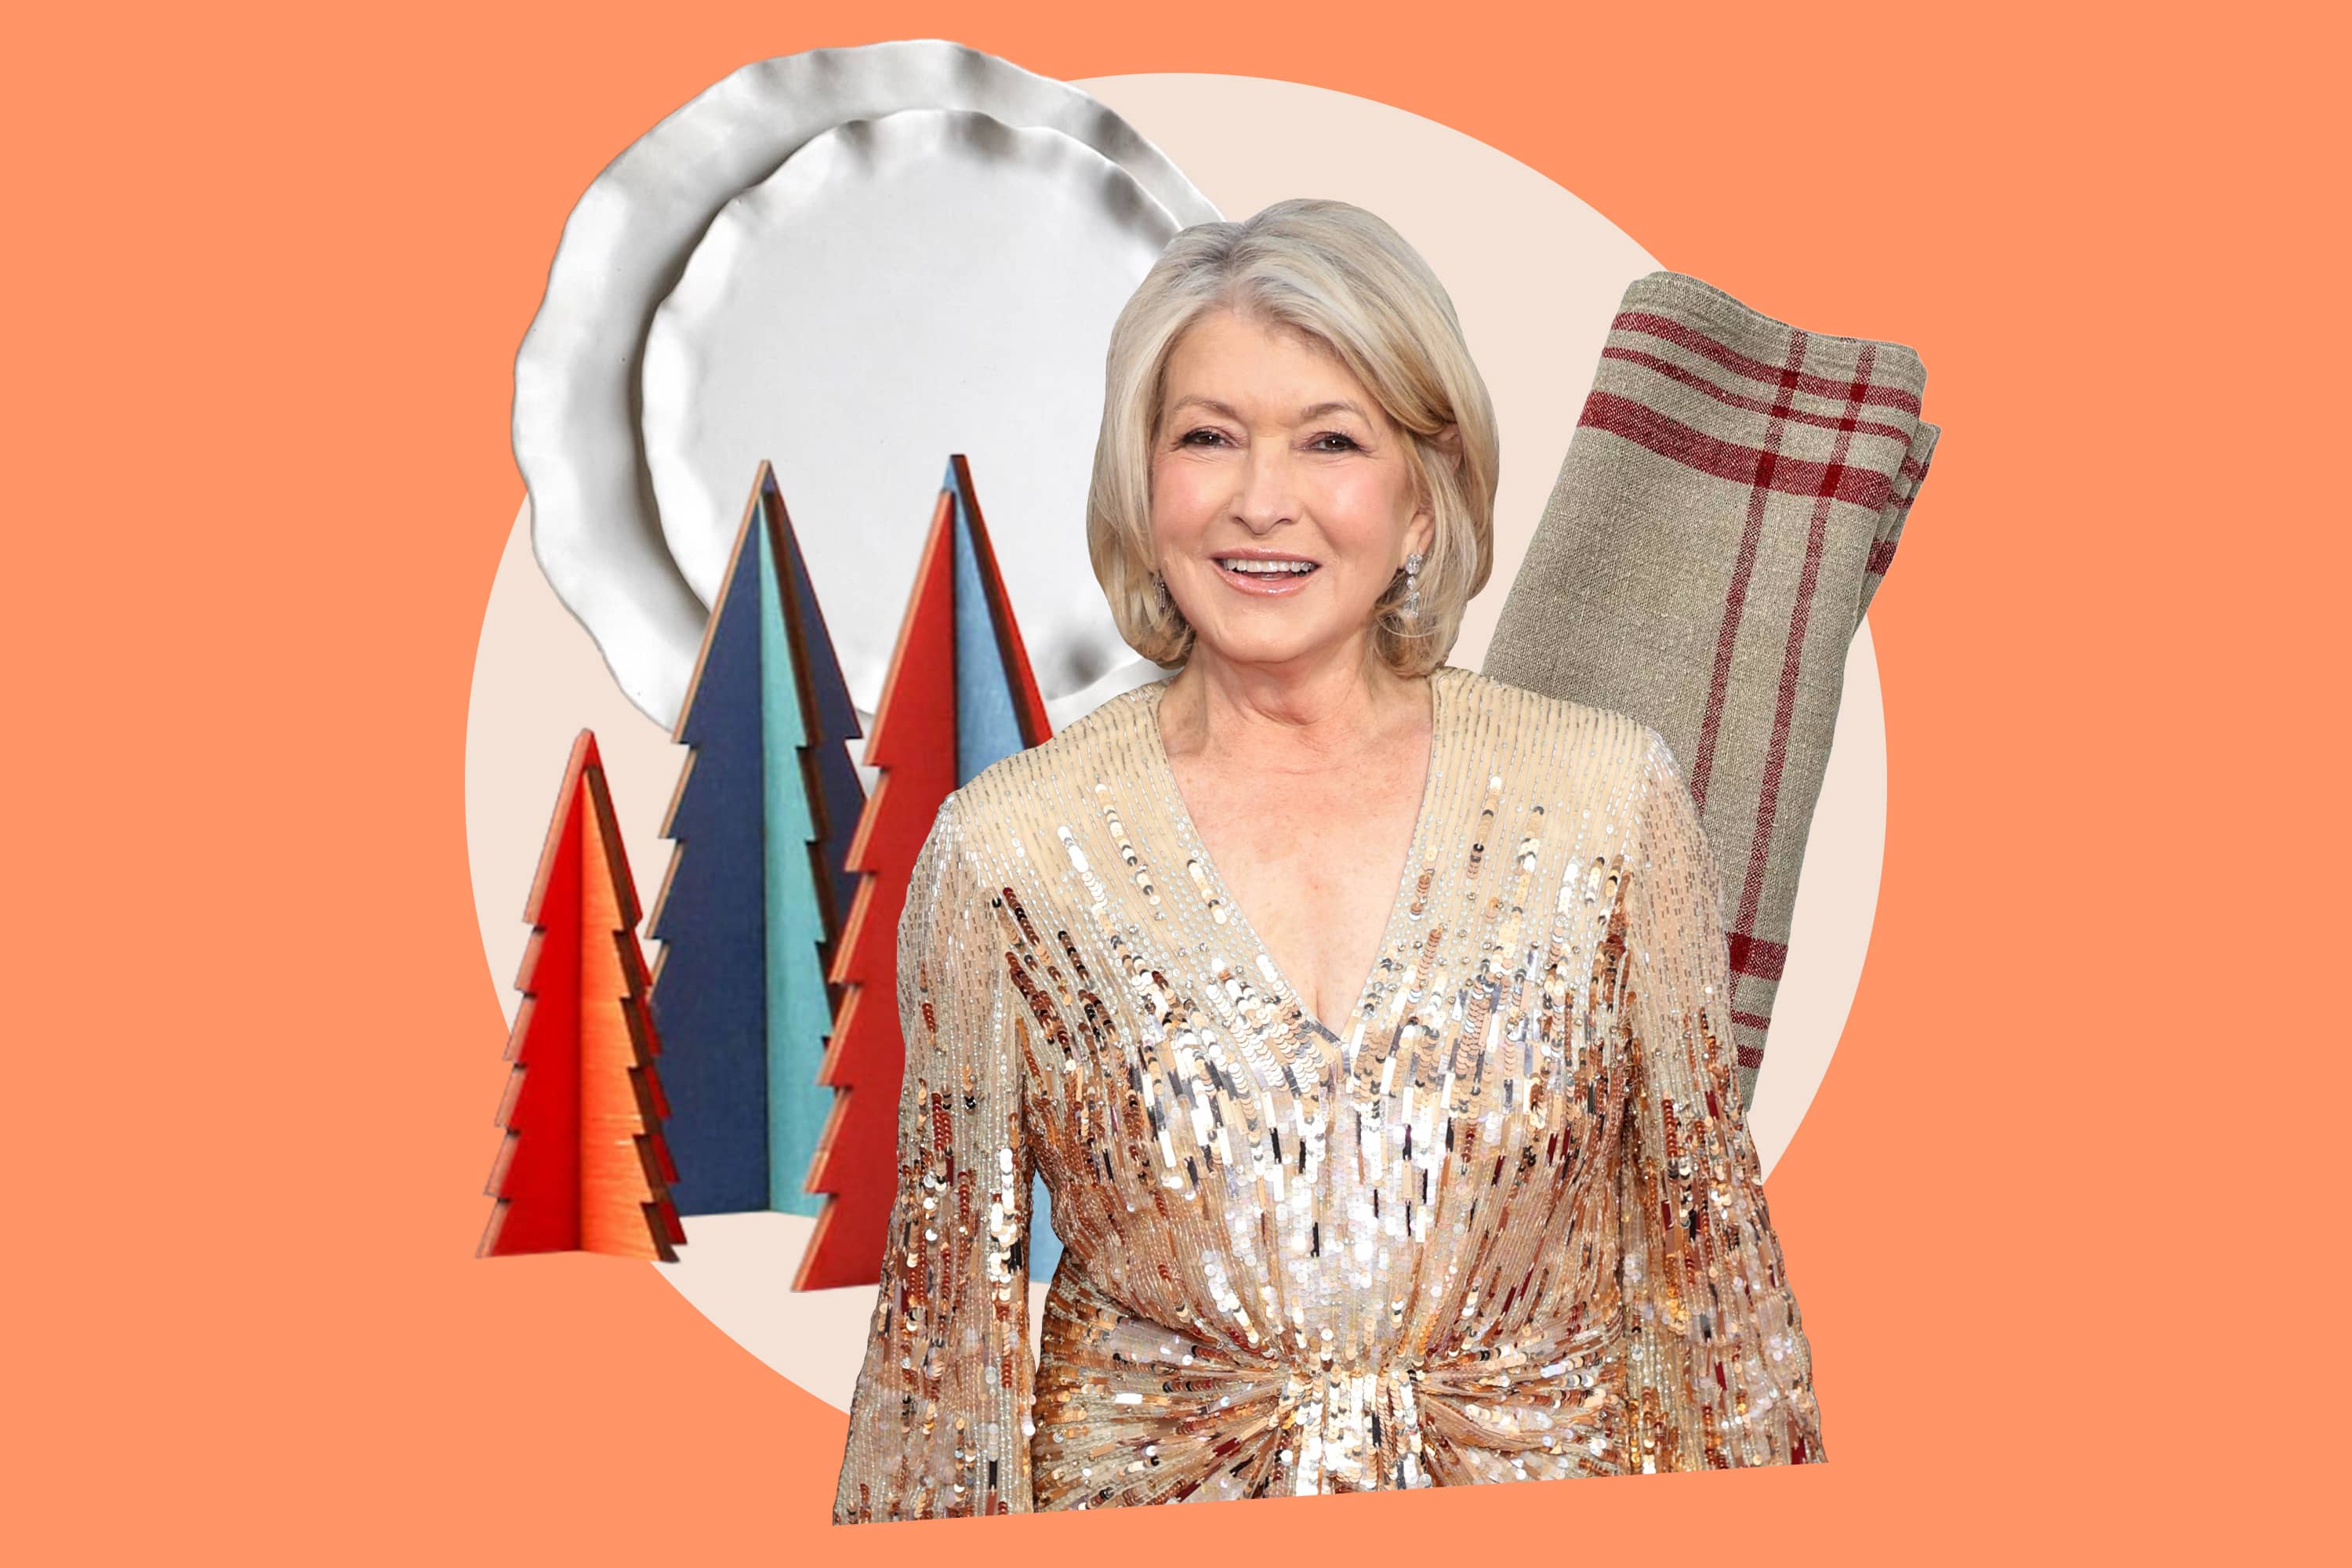 8 Tips Martha Stewart Swears by to Level Up Your Garden